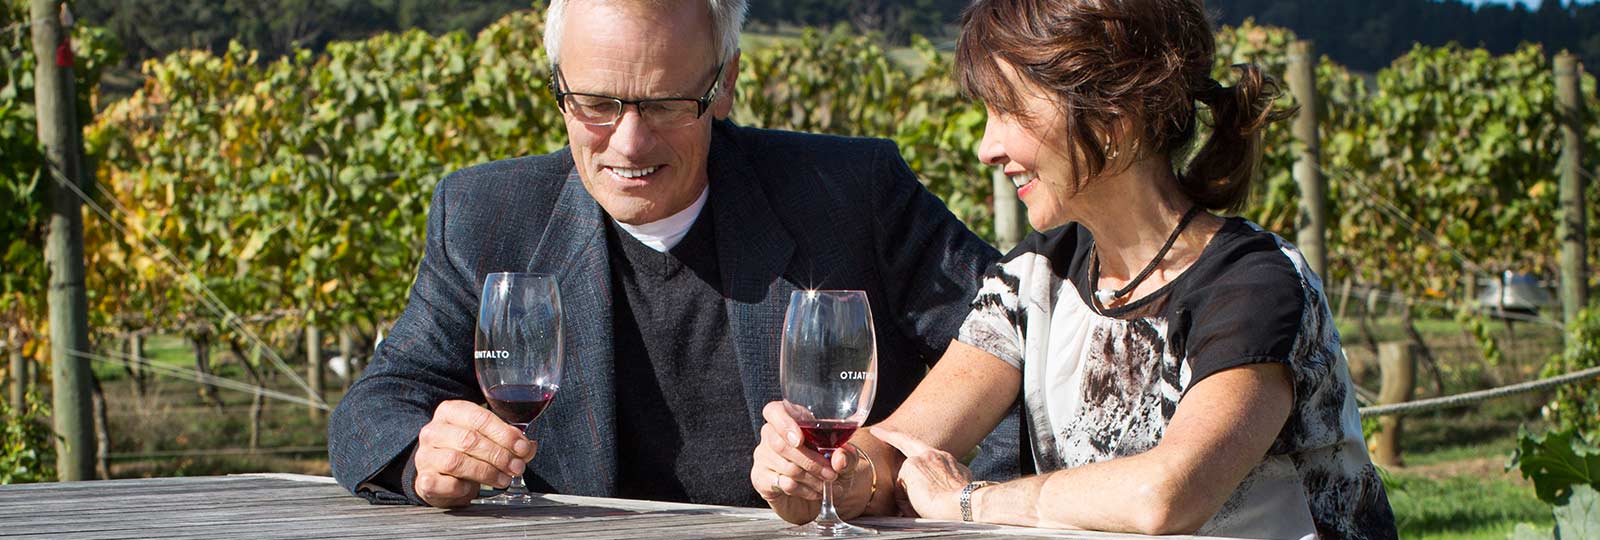 Hearing loss couple with hearing aids at winery